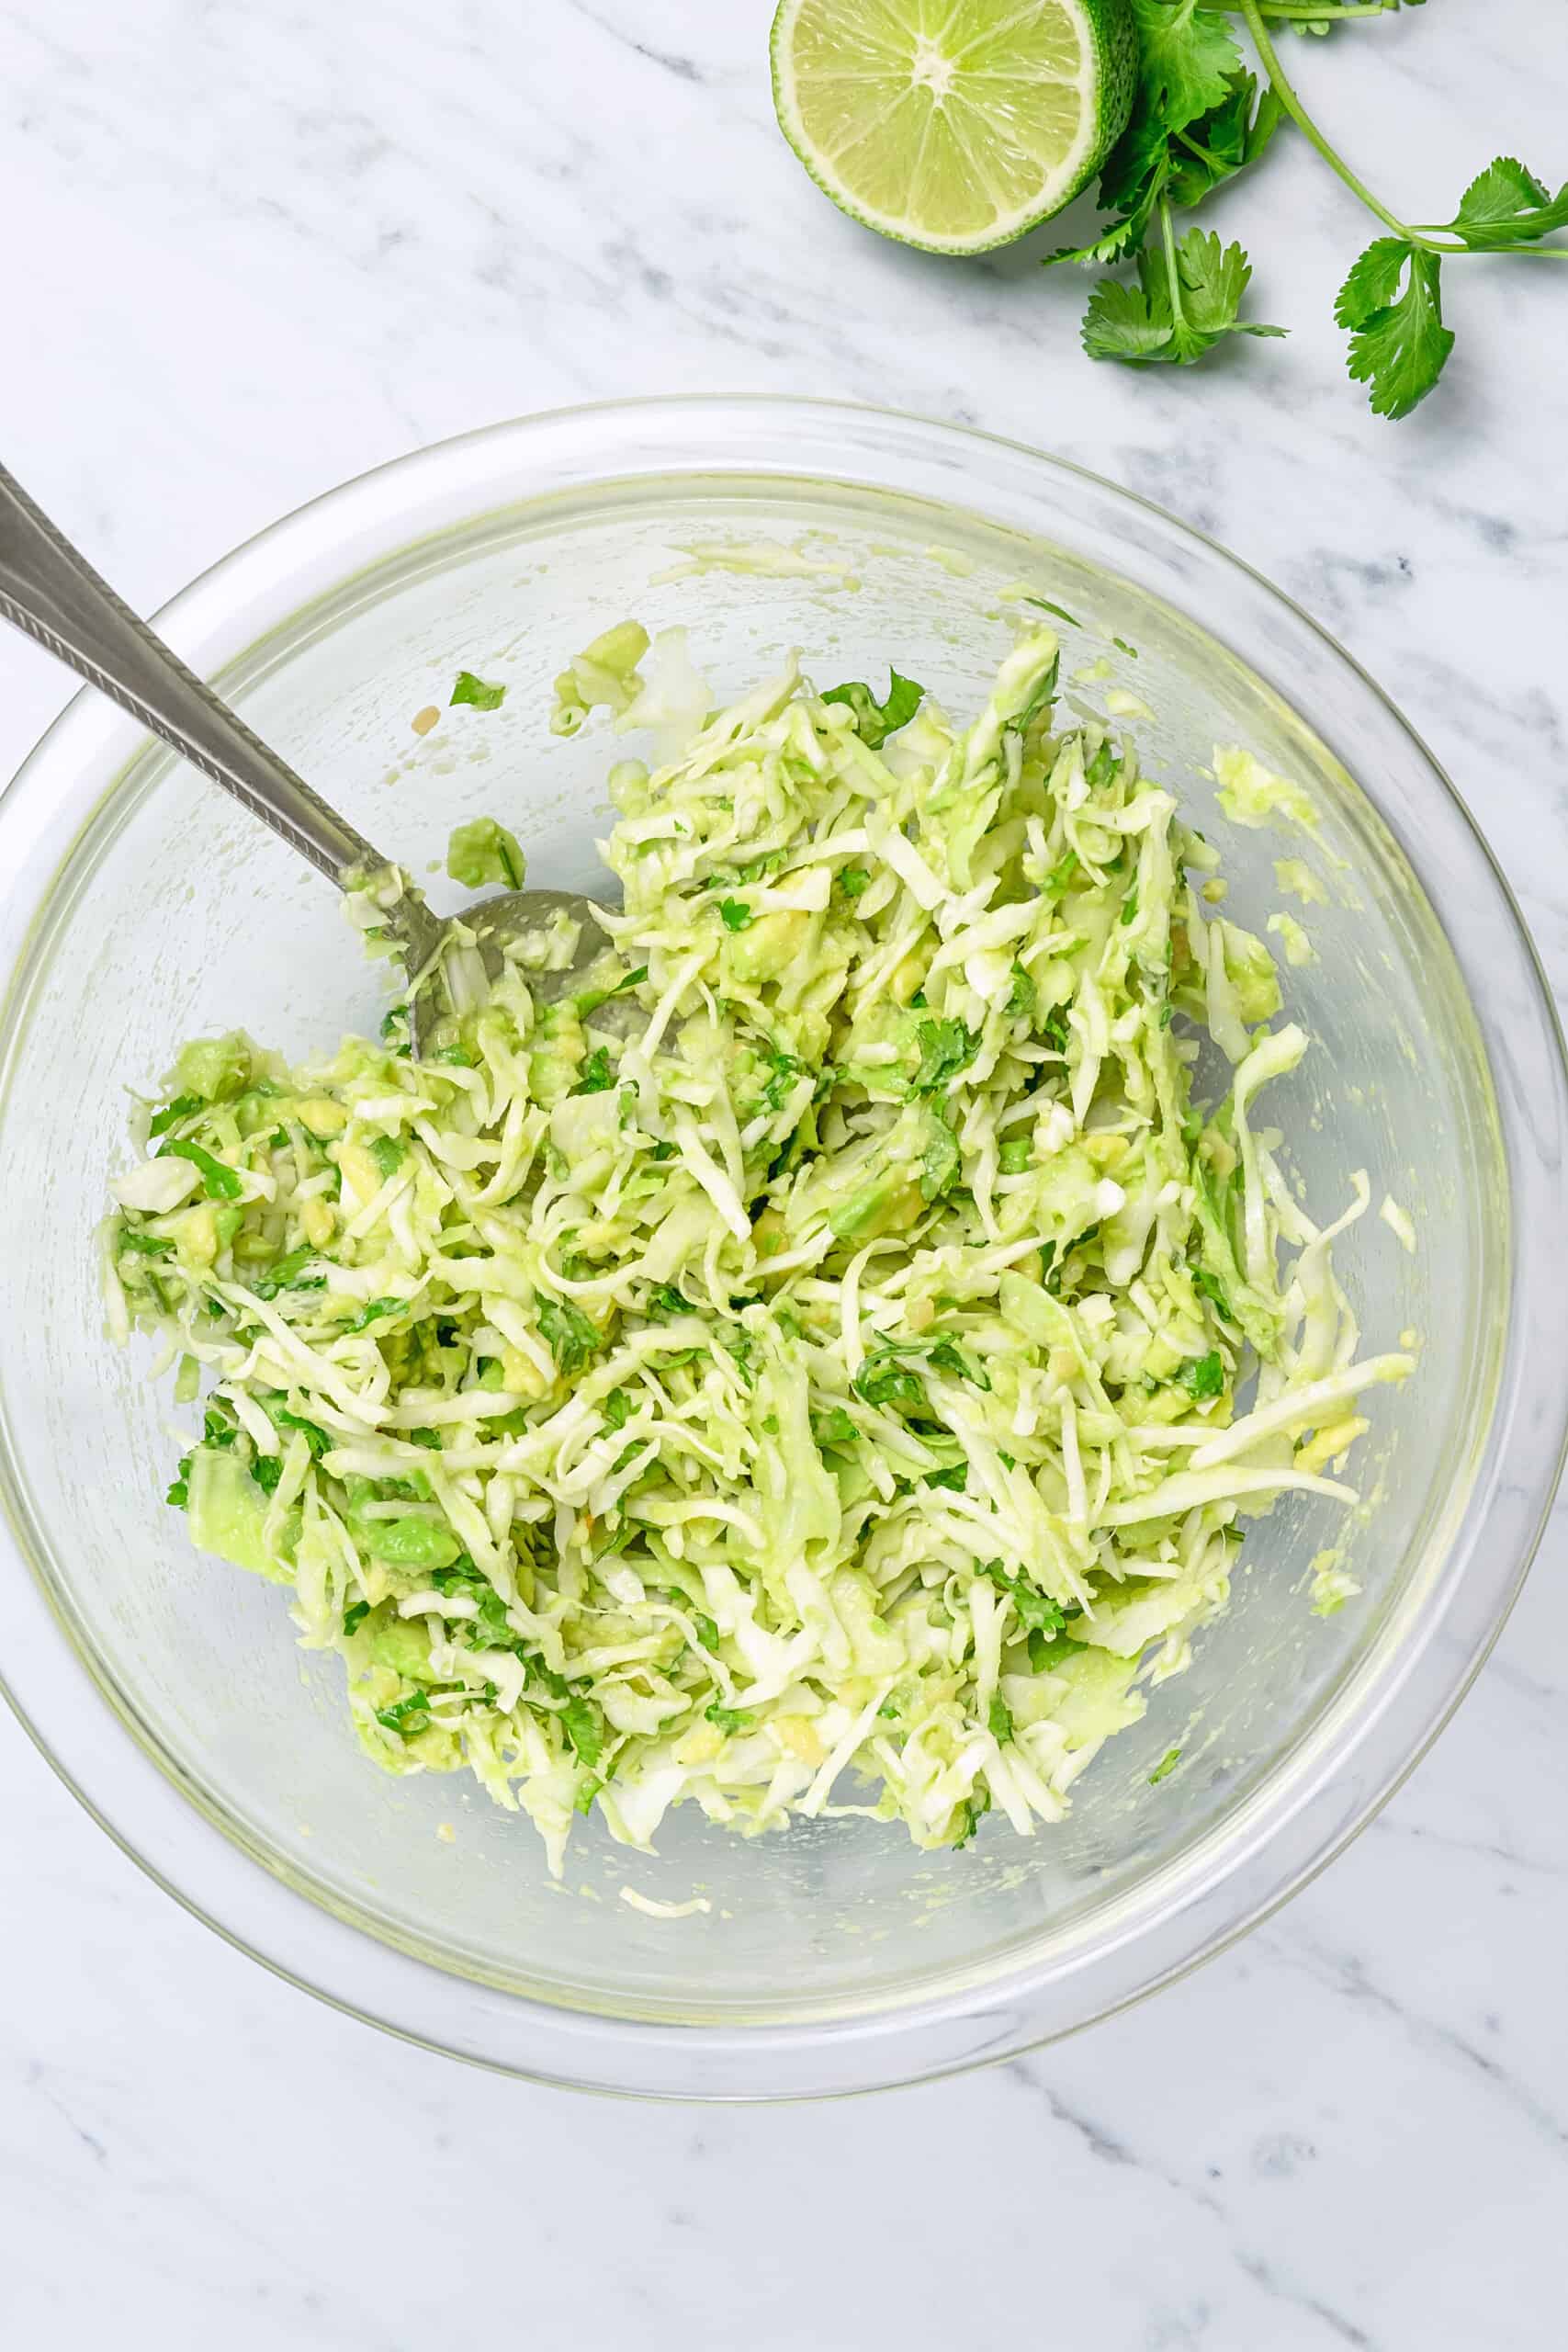 tossing cabbage with avocados in a bowl